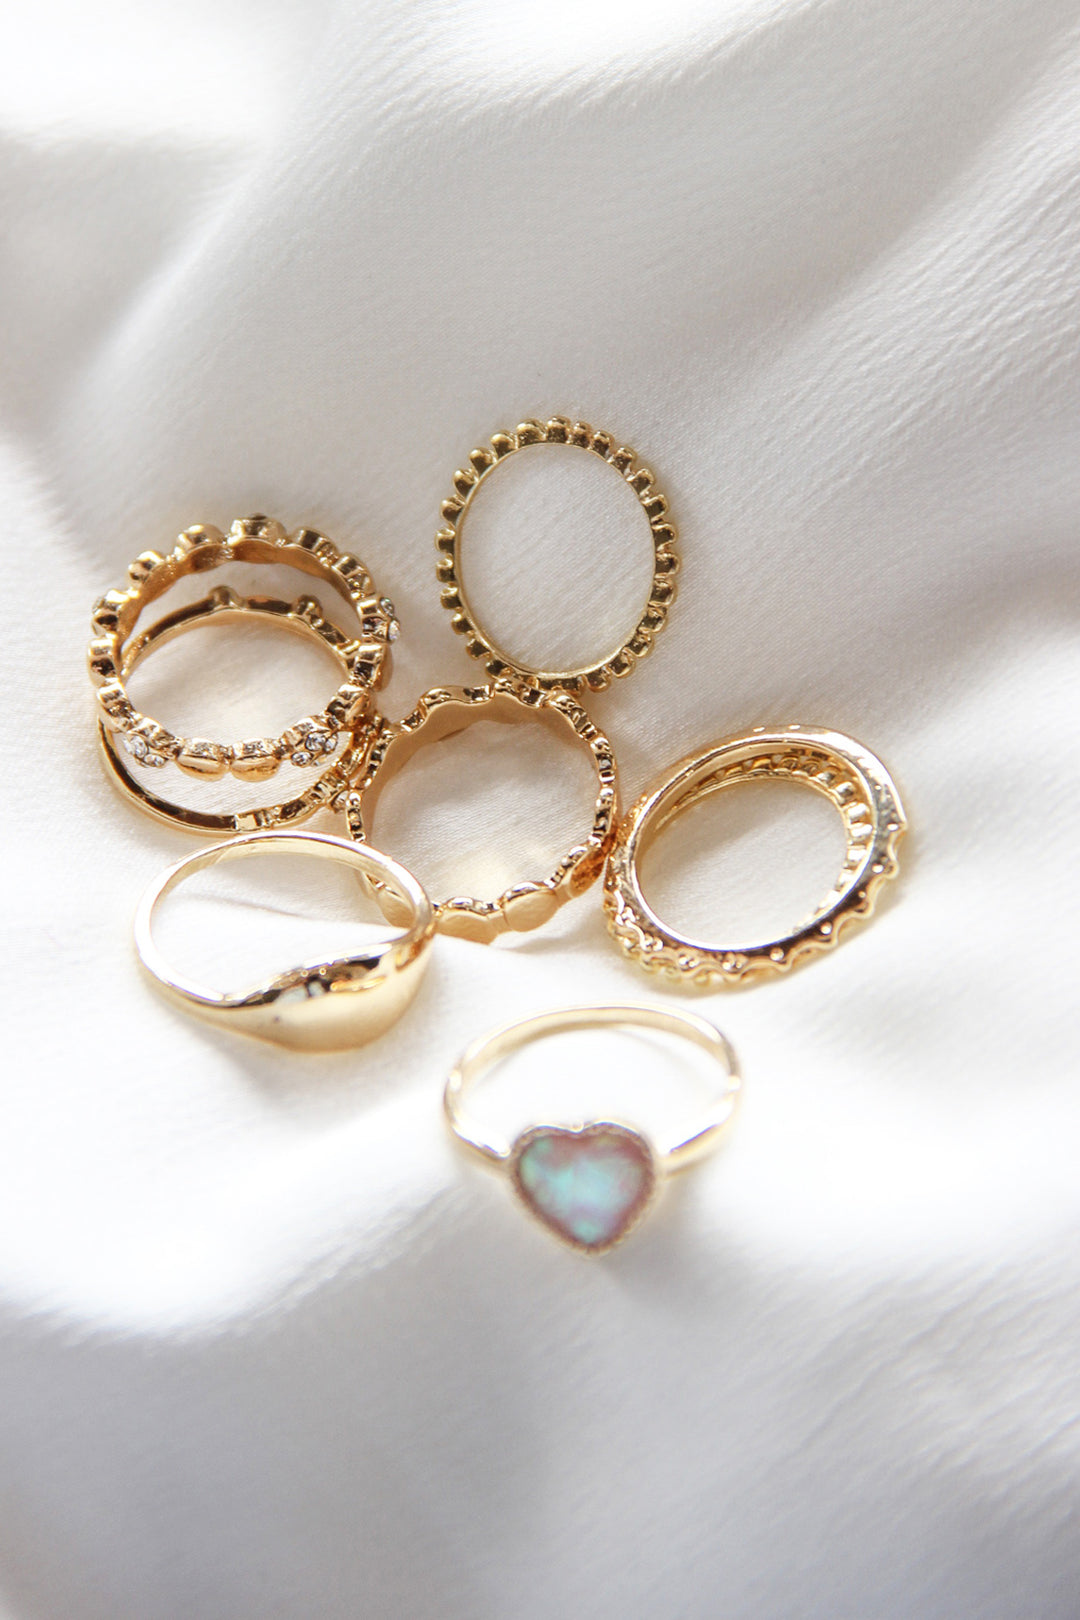 The Bea Ring Set